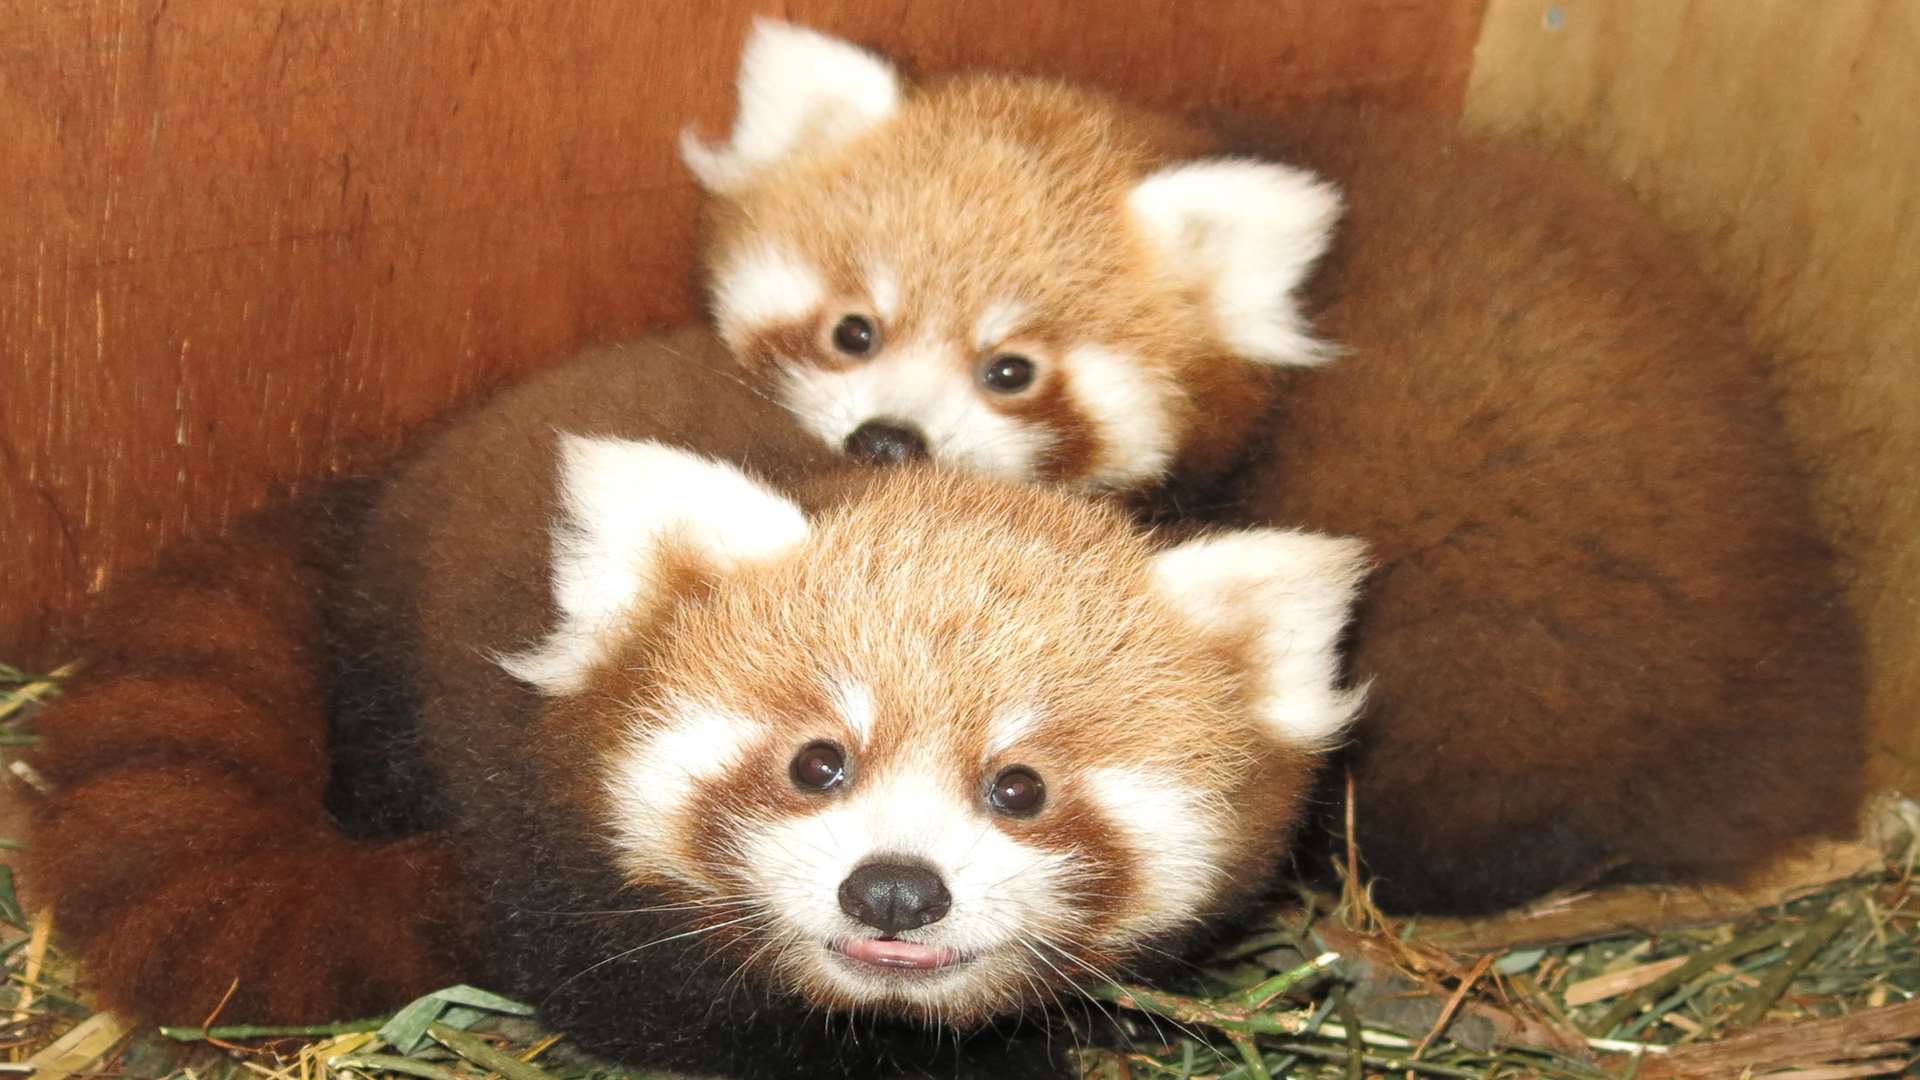 The two red panda cubs greet the world. Picture: Port Lympne Wild Animal Park